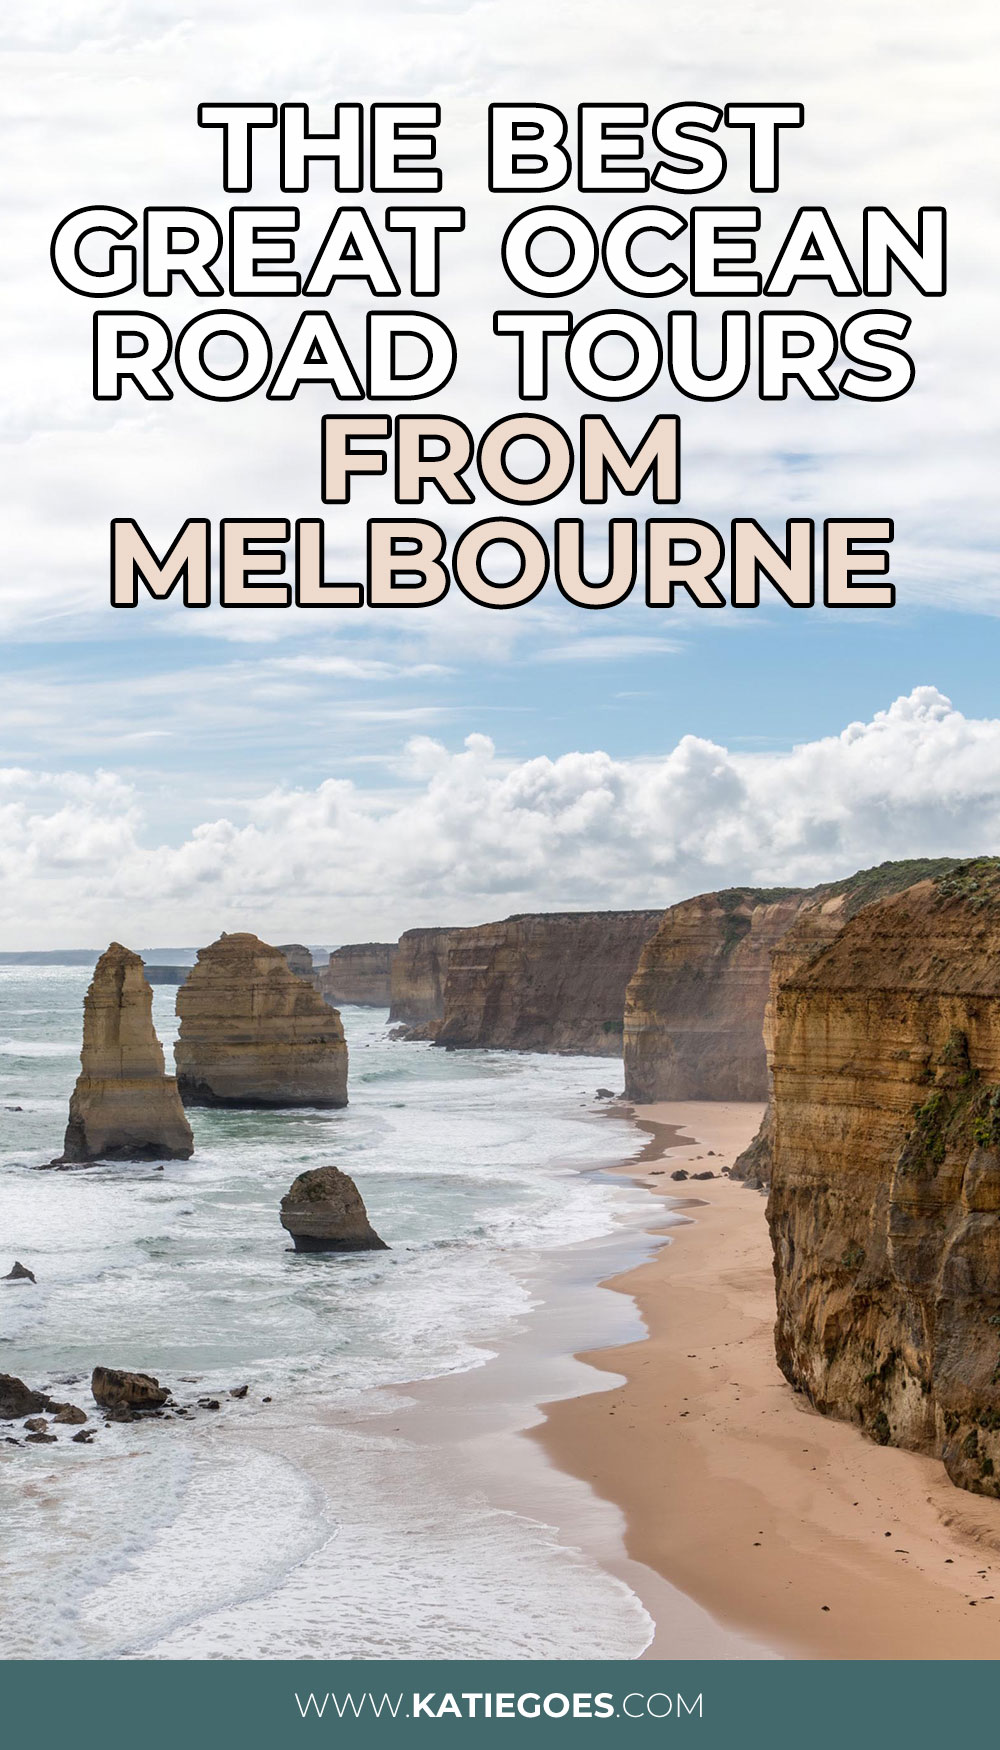 The Best Great Ocean Road Tours from Melbourne